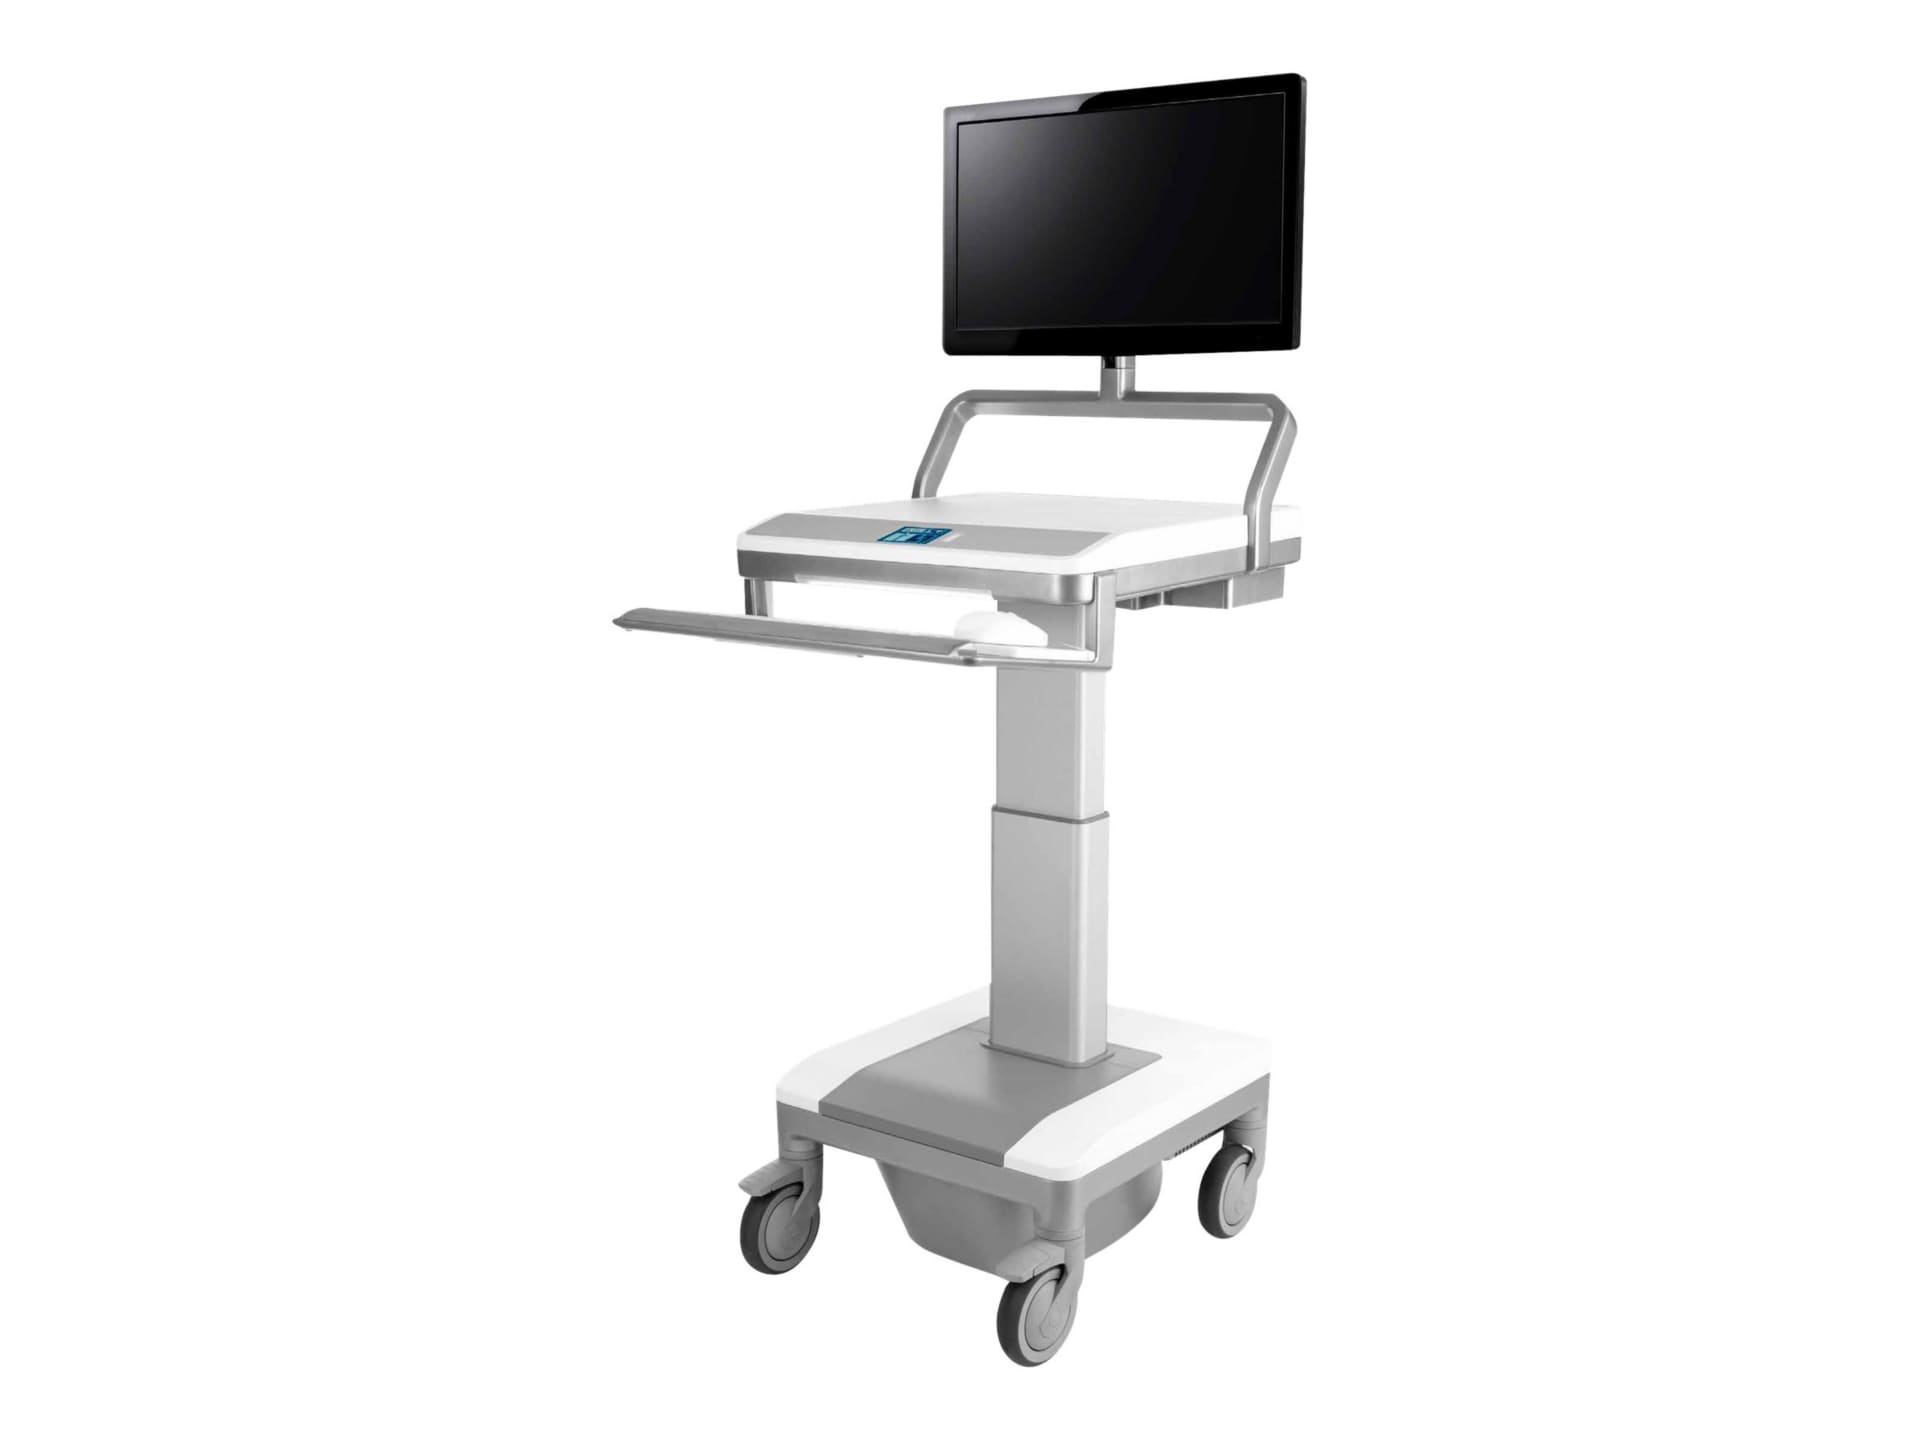 Capsa Healthcare T7 Powered Technology Cart - cart - for LCD display / keyboard / mouse / CPU - white